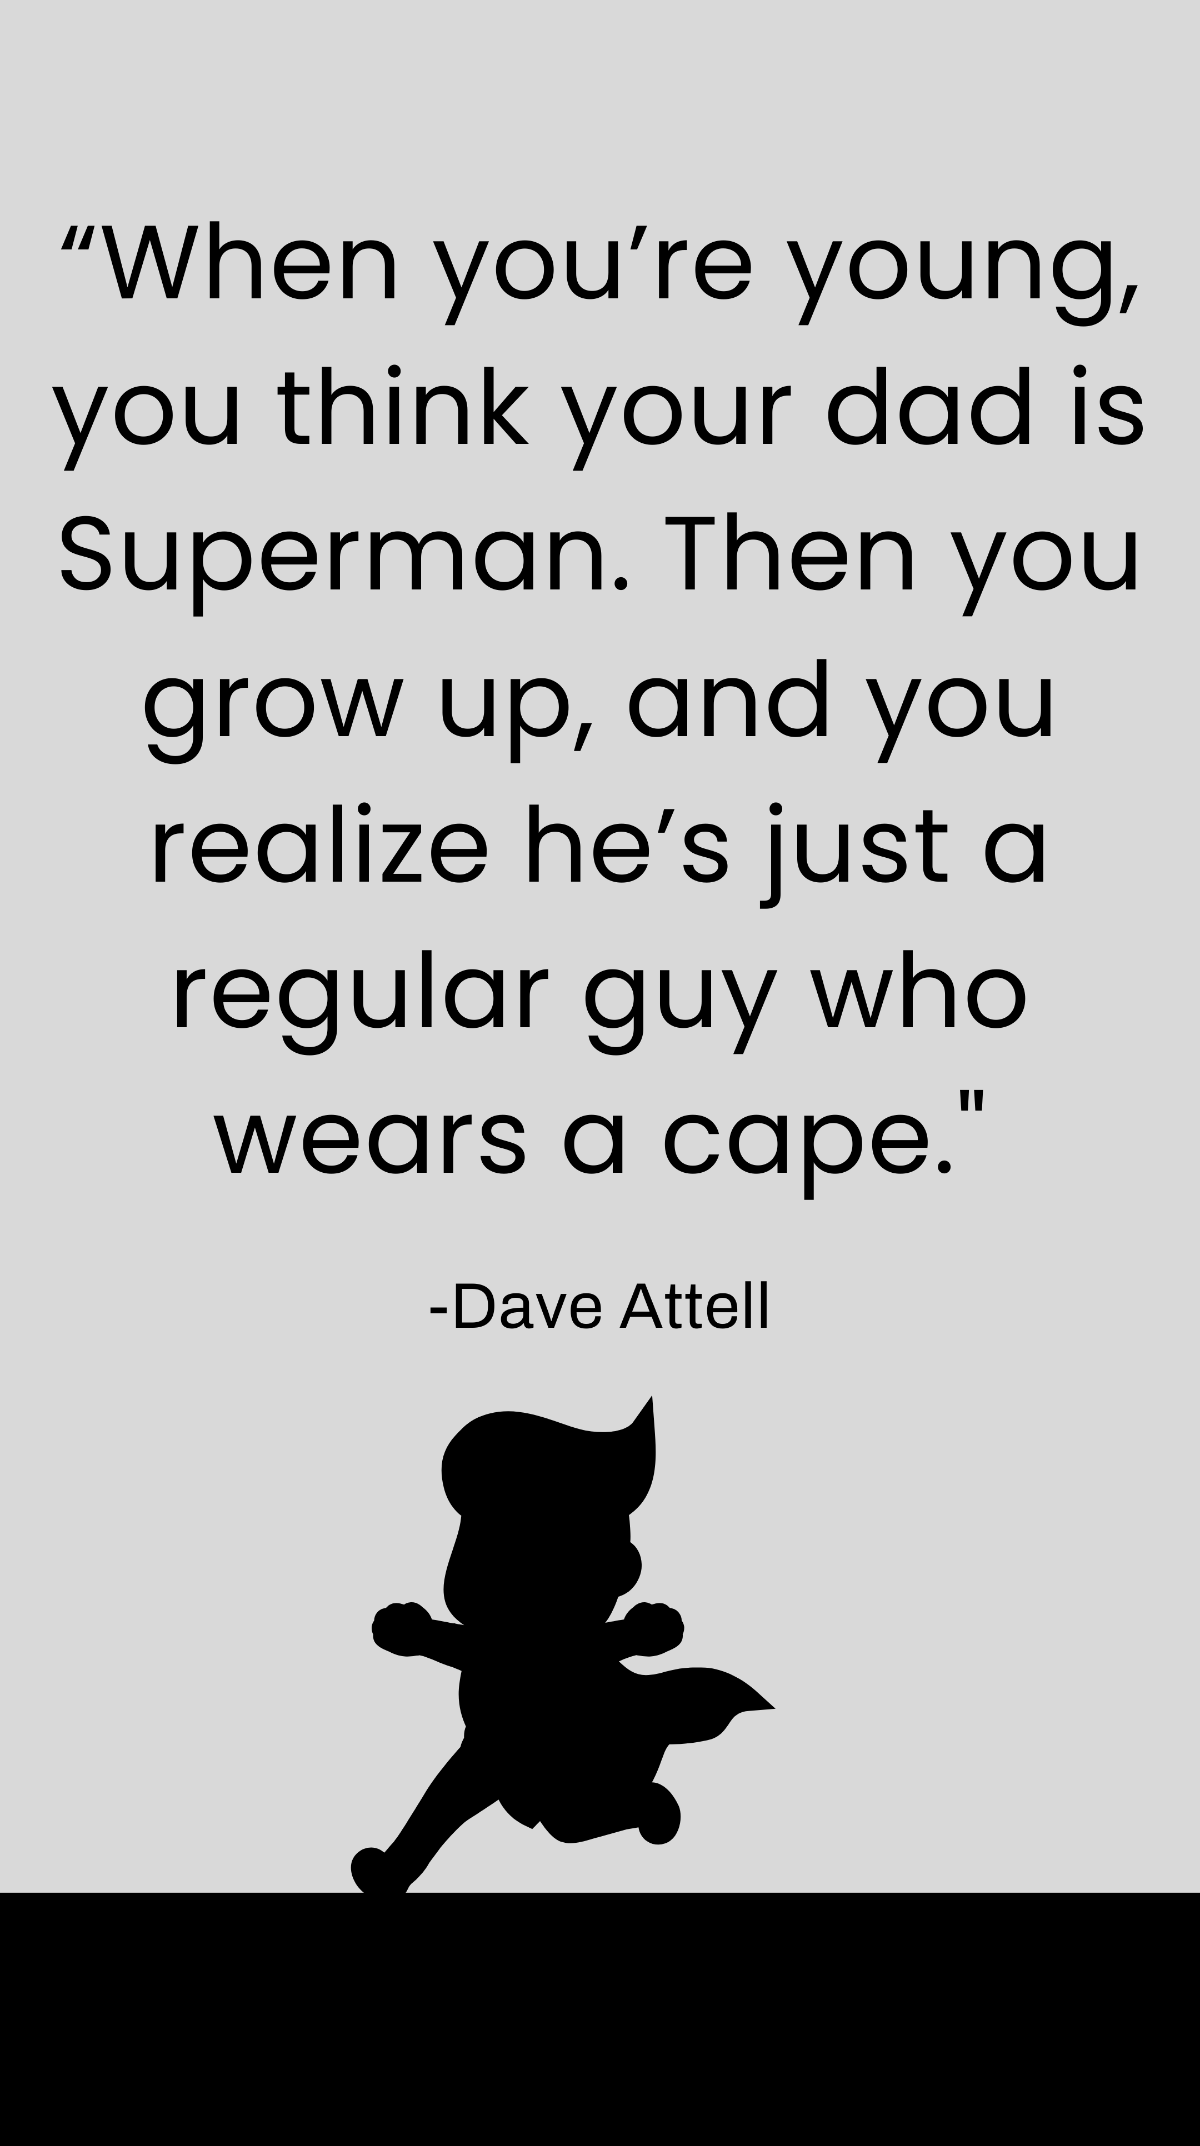 Dave Attell - “When you’re young, you think your dad is Superman. Then you grow up, and you realize he’s just a regular guy who wears a cape.” Template